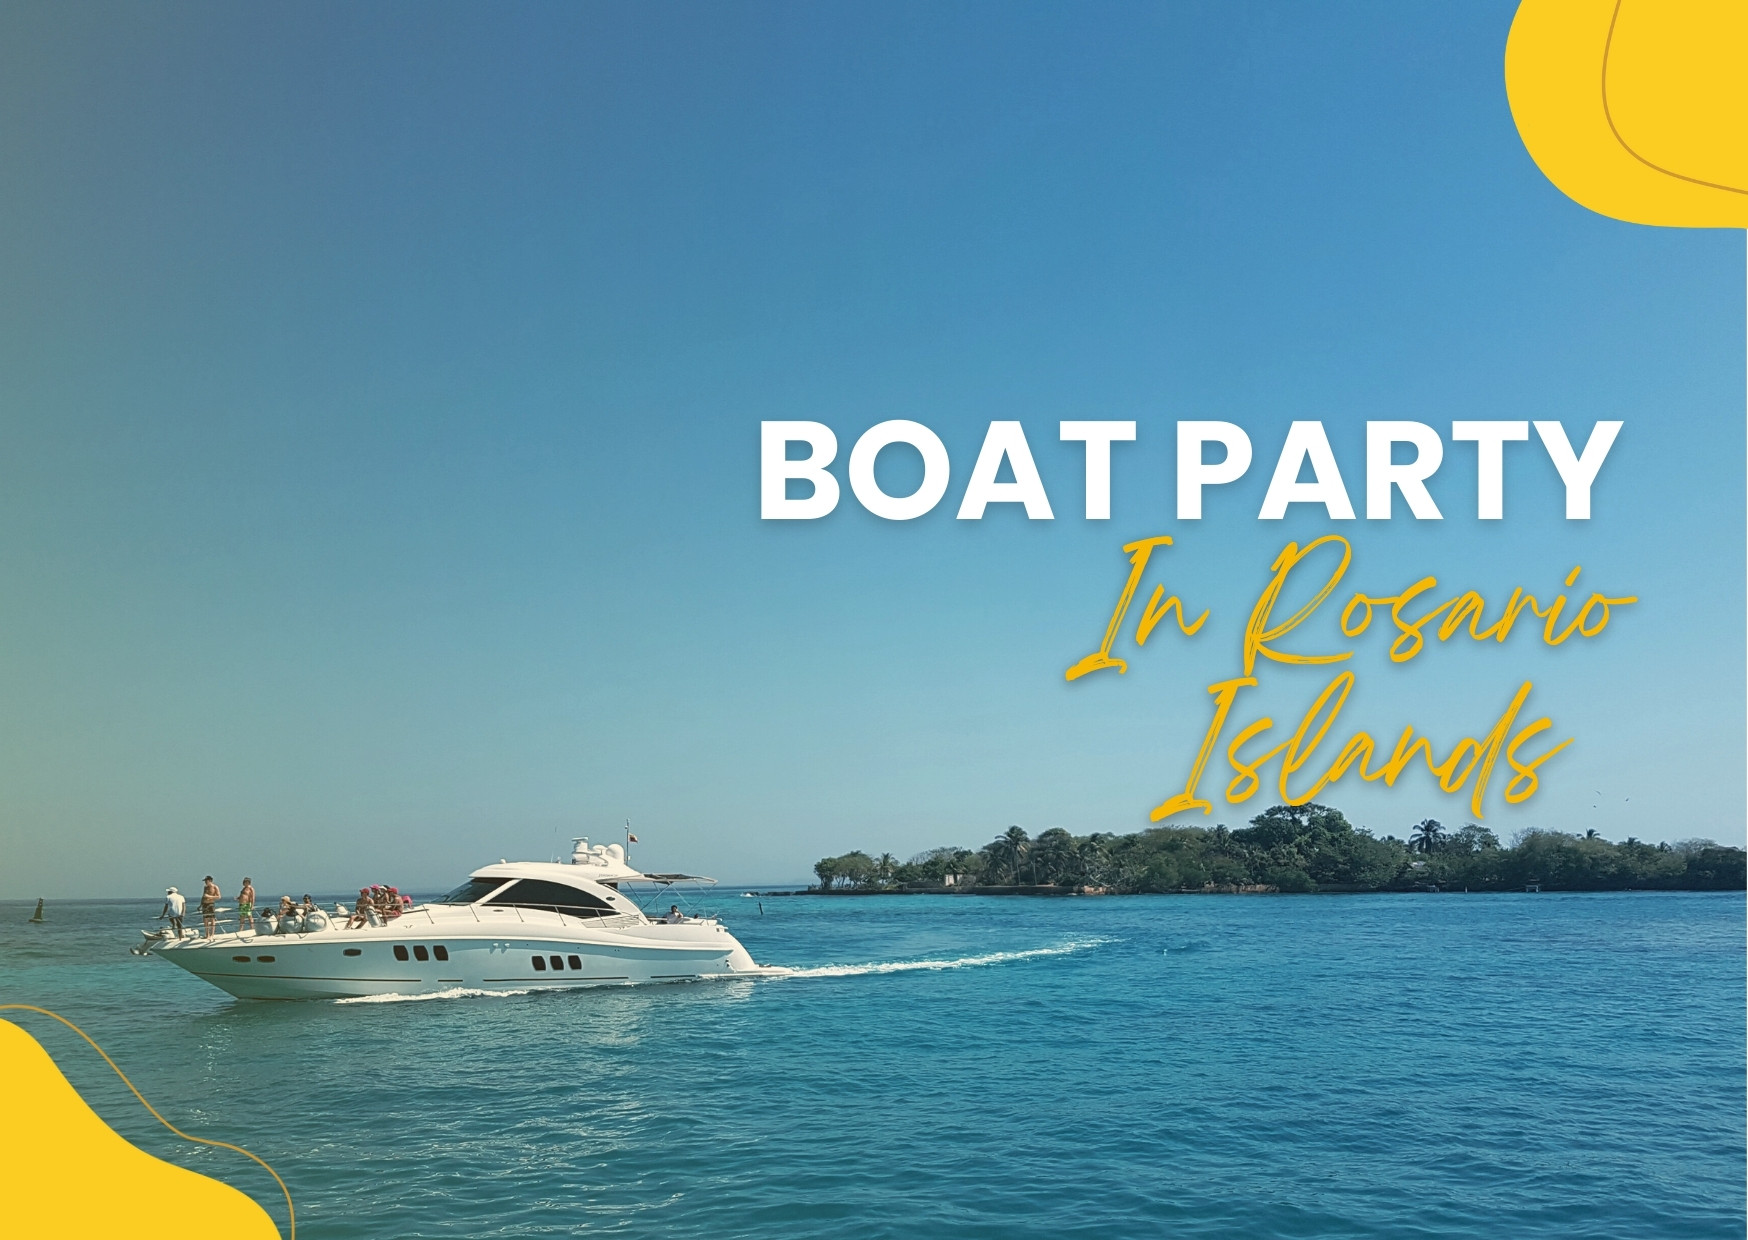 Boat rental in cartagena for bachelor parties